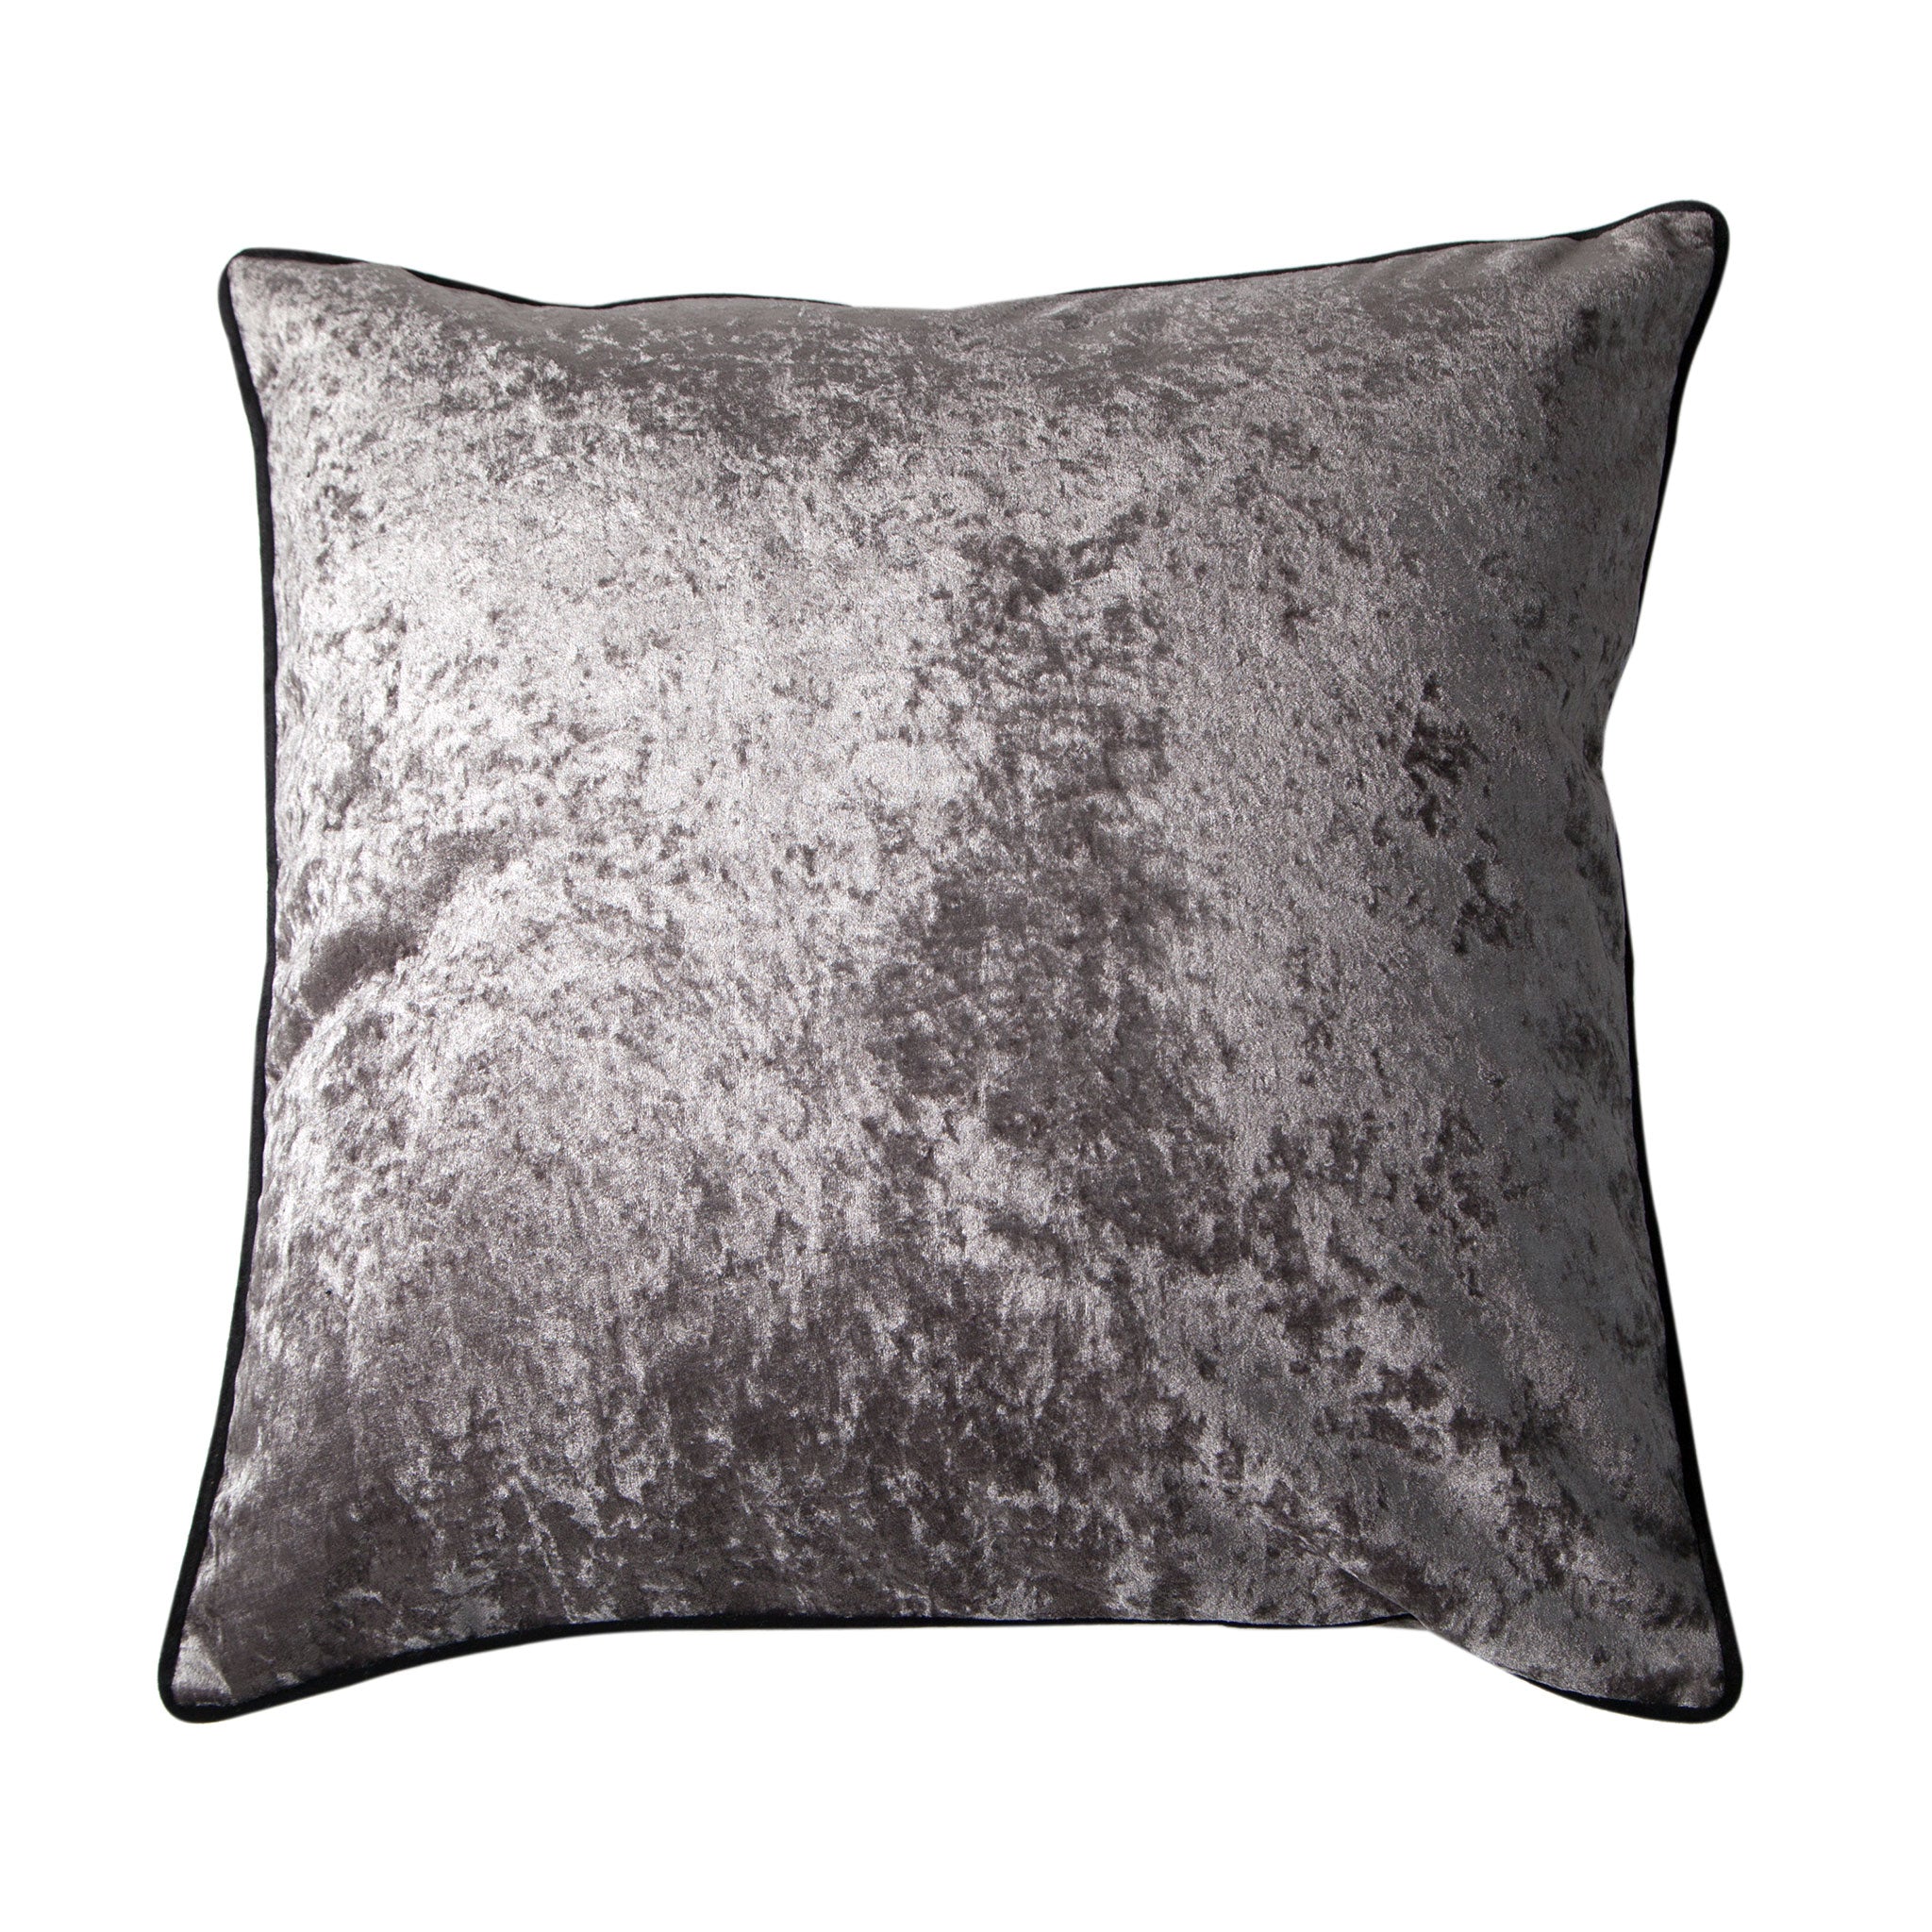 Bivain---C083-Grey-velvet-cushion-with-black-piping-front-and-back.jpg